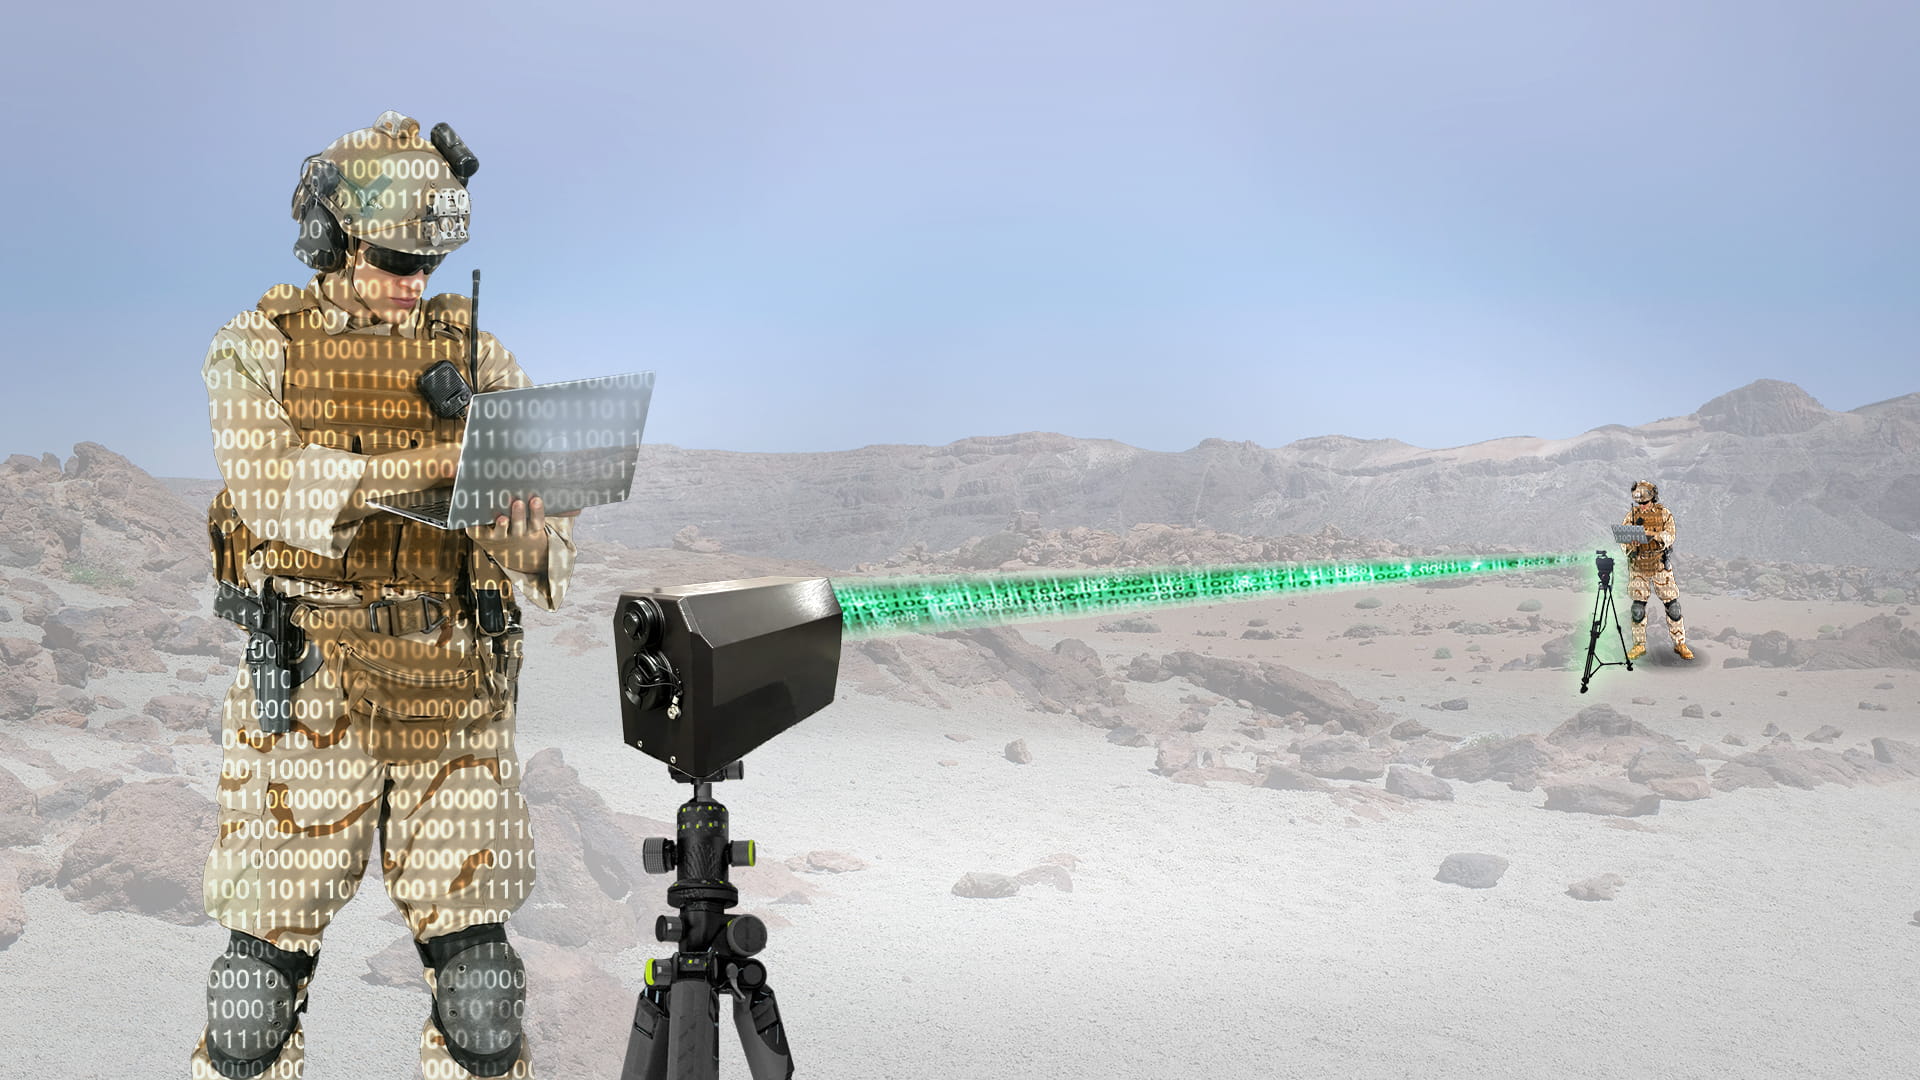 NexGen Optics provides the warfighter with high-bandwidth, high-speed, secure communications in a rugged lightweight package for field deployment.